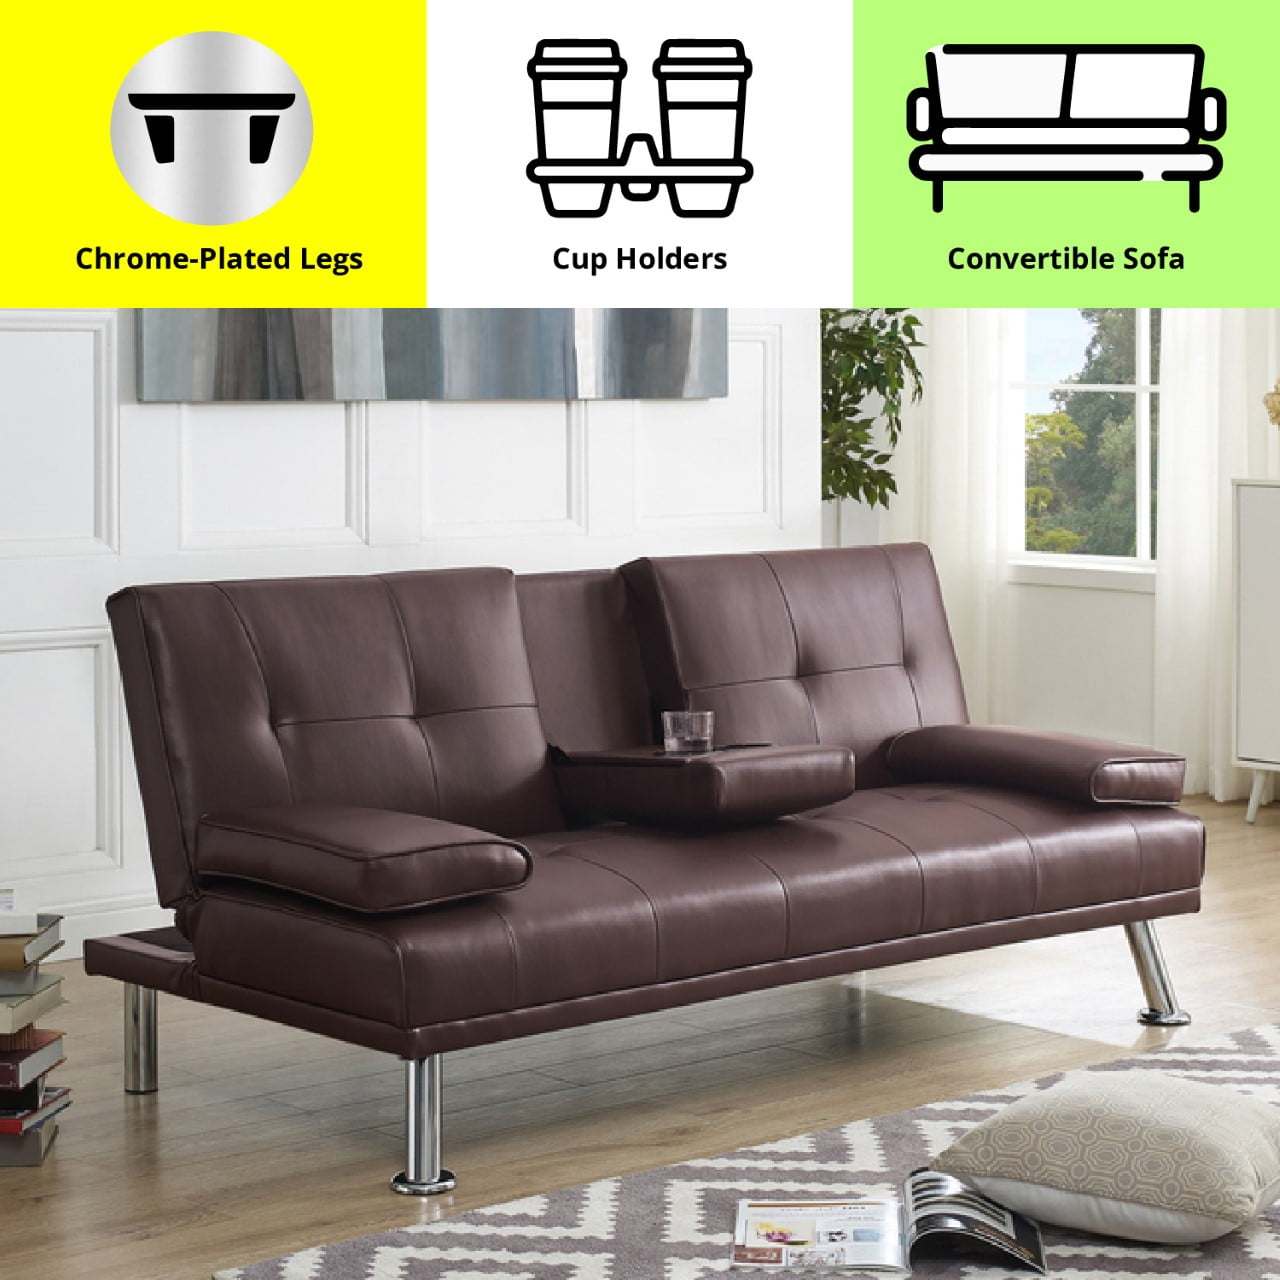 Details about   Modern Faux Leather Futon Sofa Bed Fold Up & Down Recliner w/ Armrest Cup Holder 